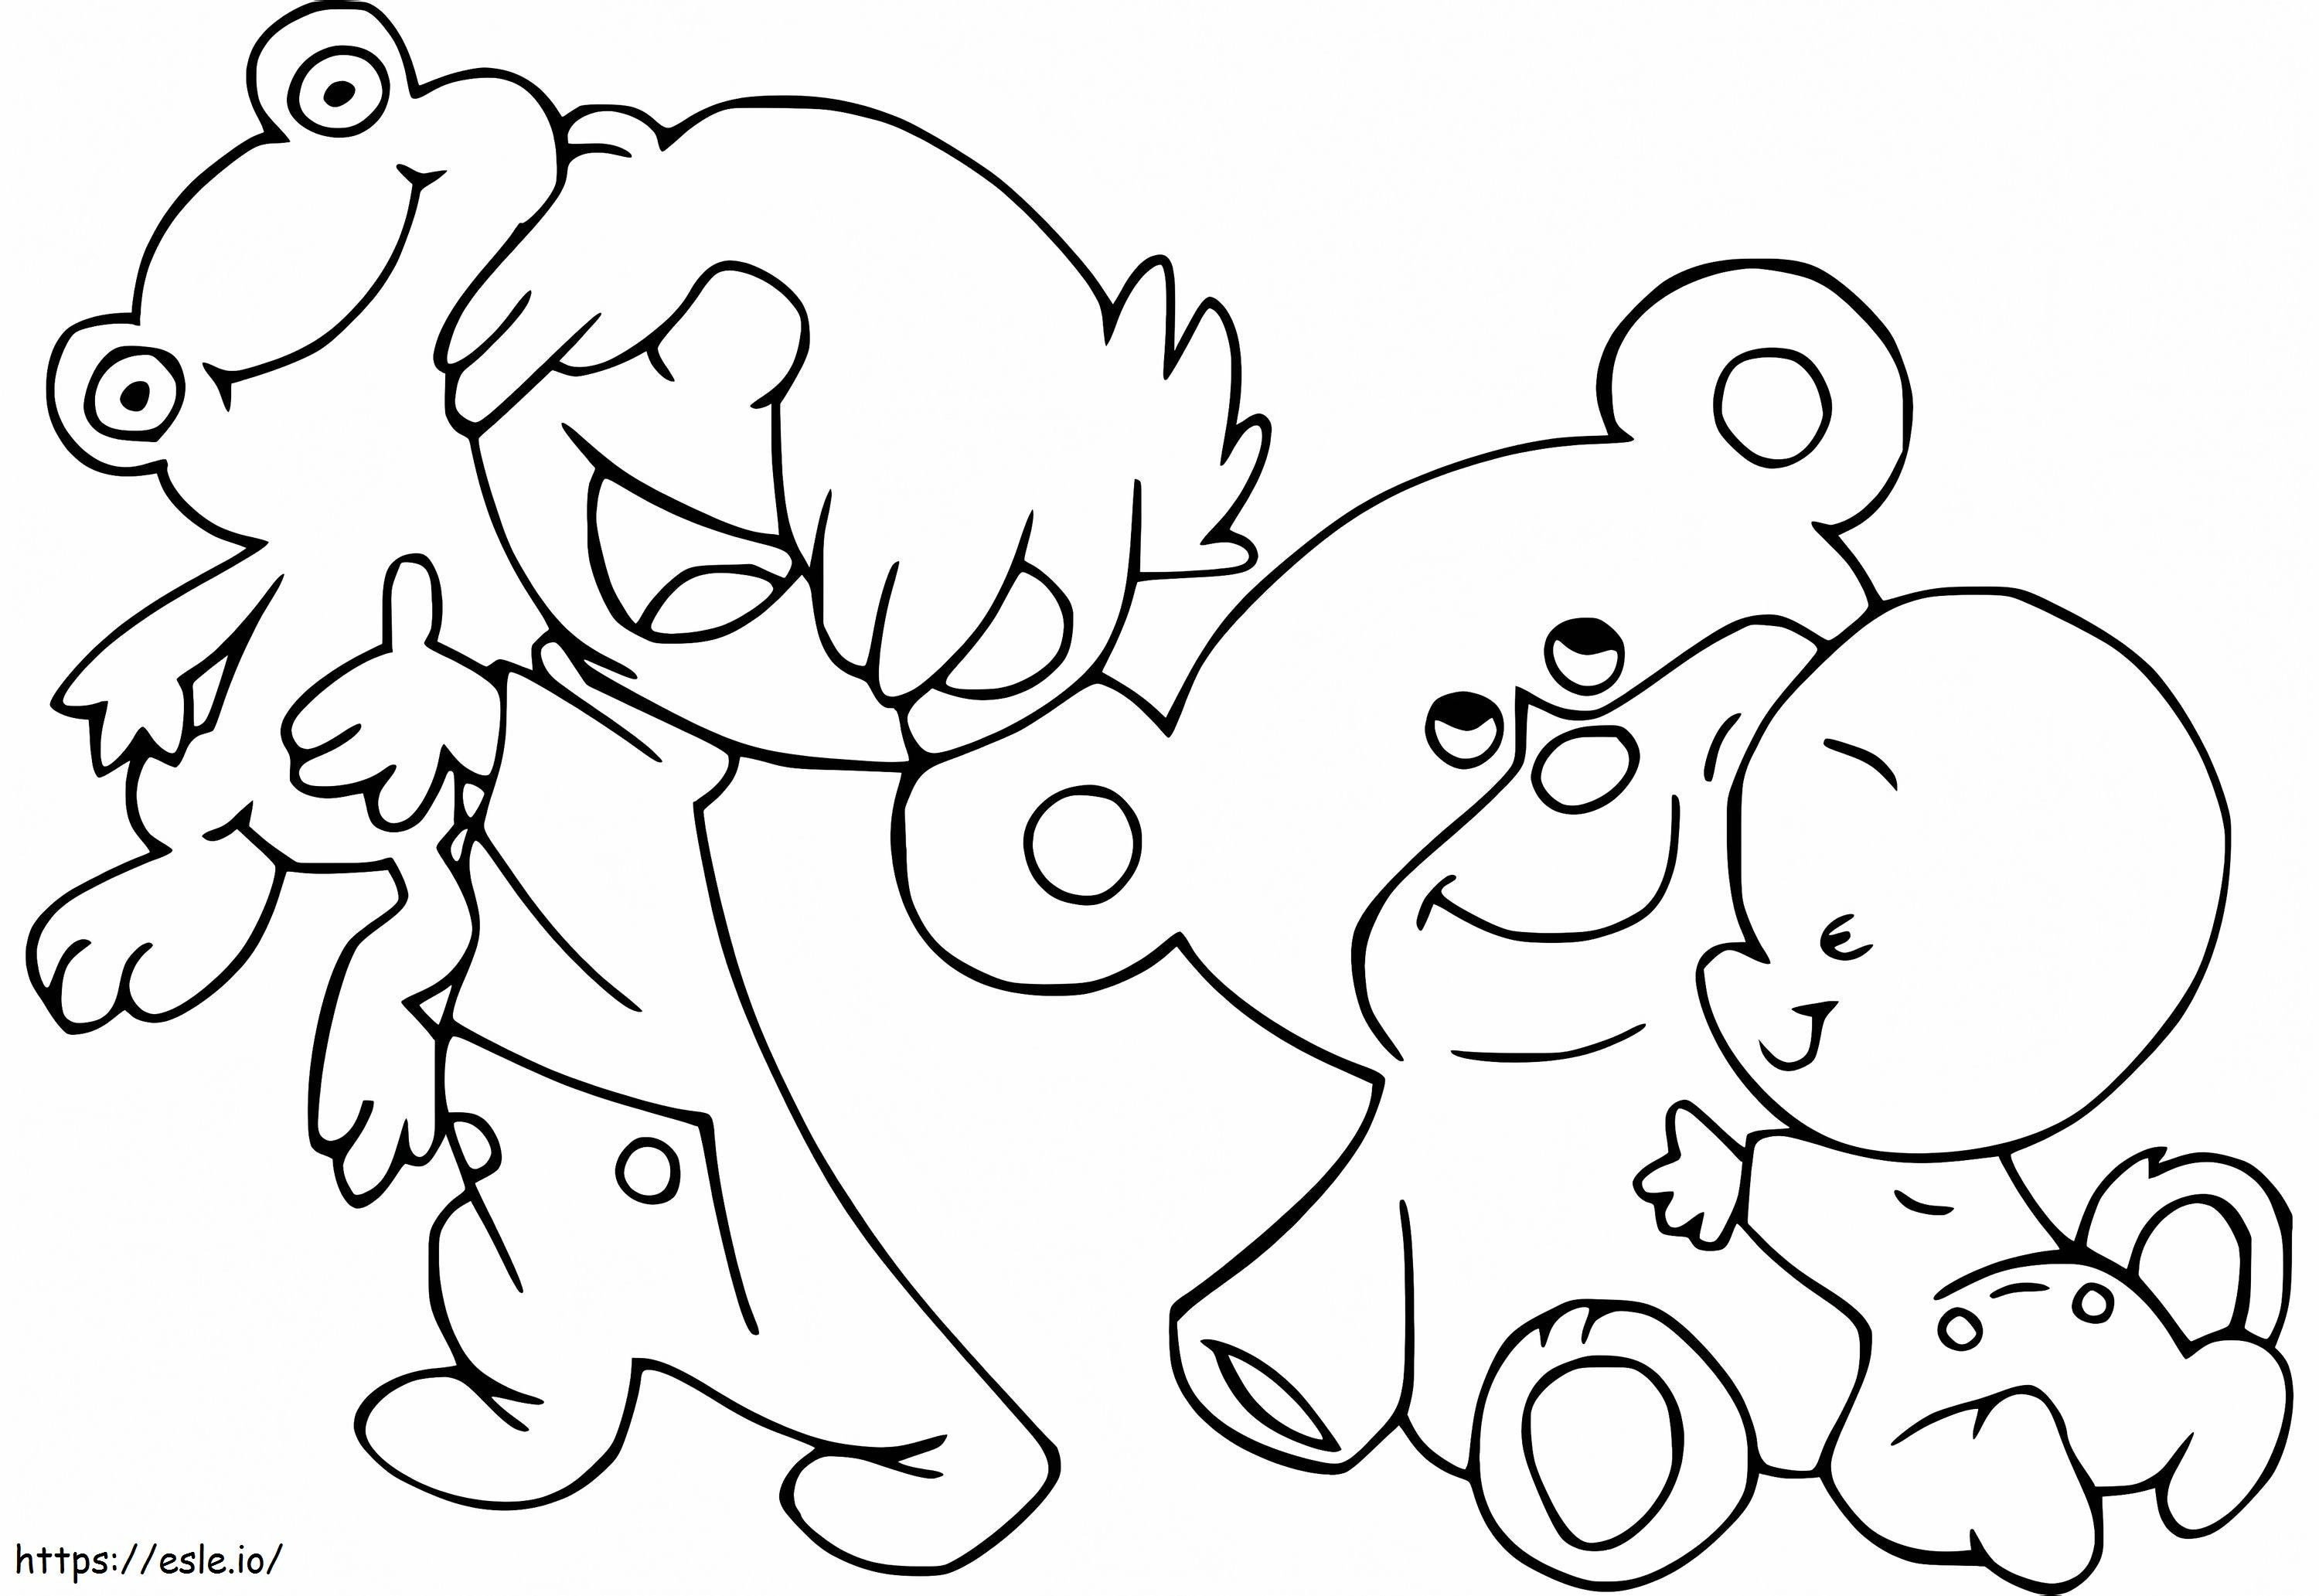 Pelusin And Cuquin coloring page